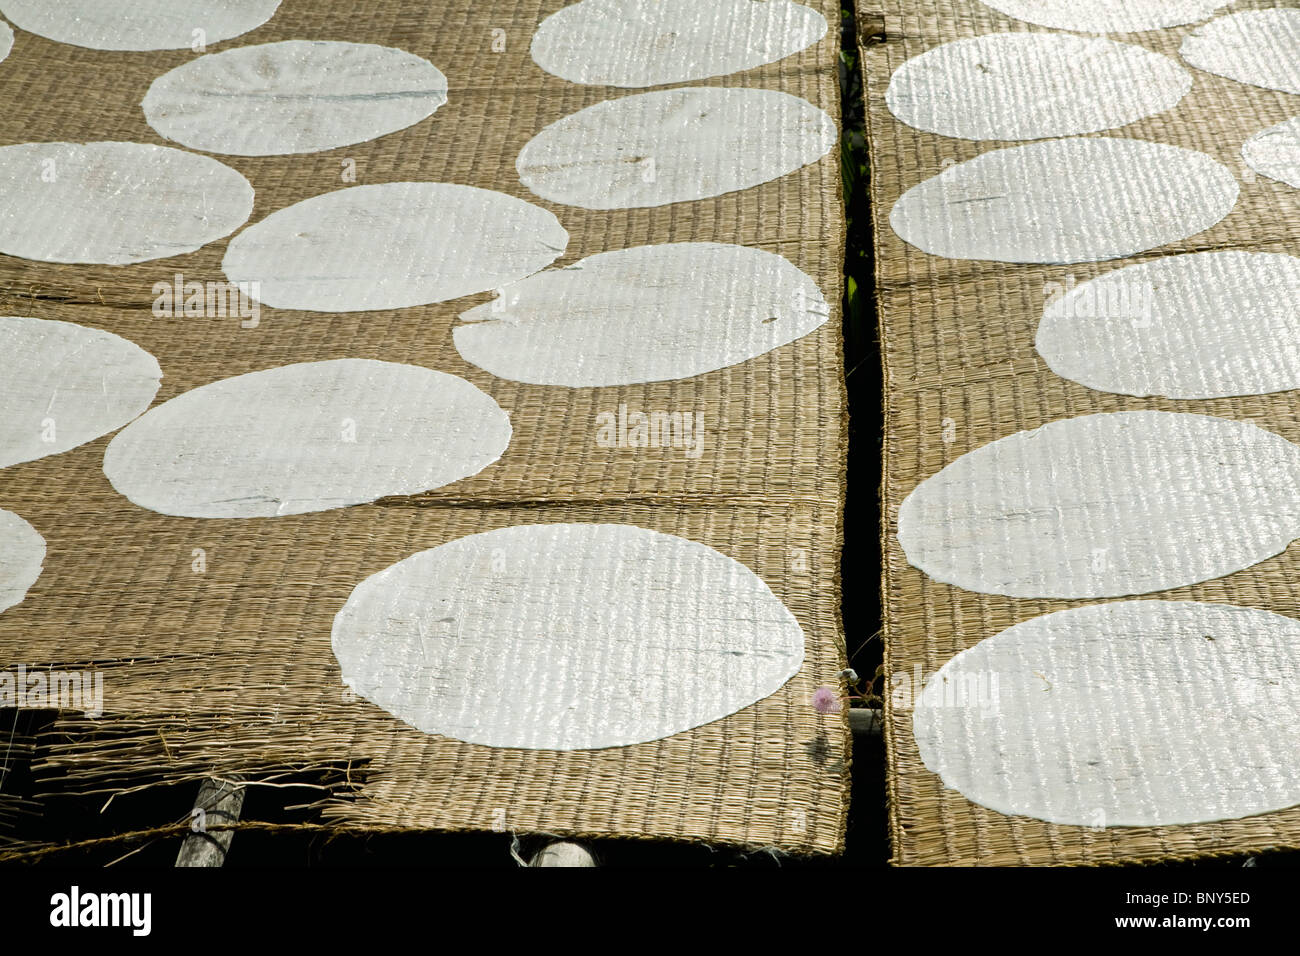 Artisanal production of coconut rice sheets, sheets drying in sun Stock Photo